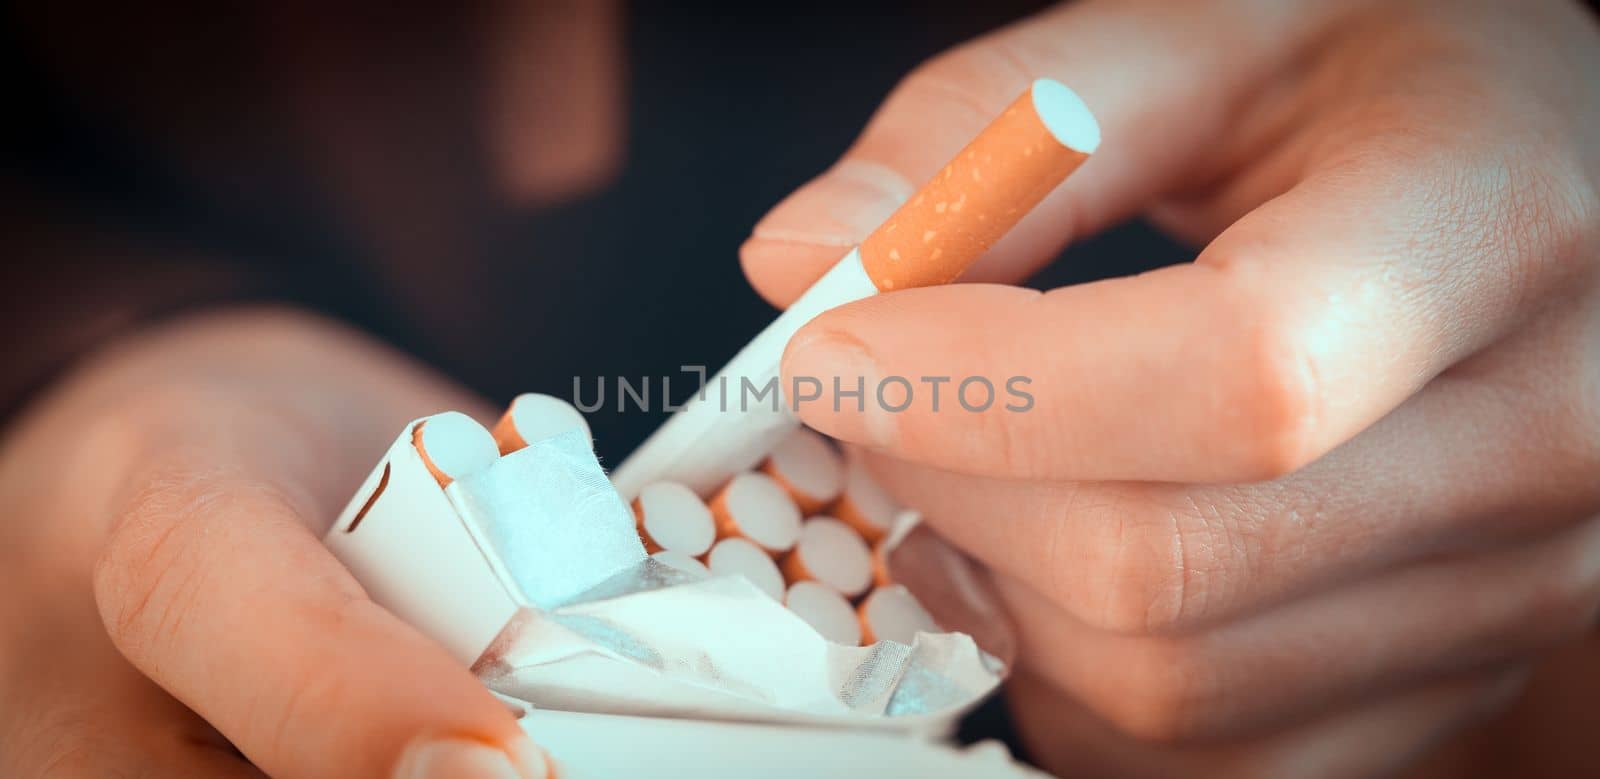 A man holds a pack of cigarettes in his hands, hand with a cigarette closeup. Person with a bad habit that is unhealthy